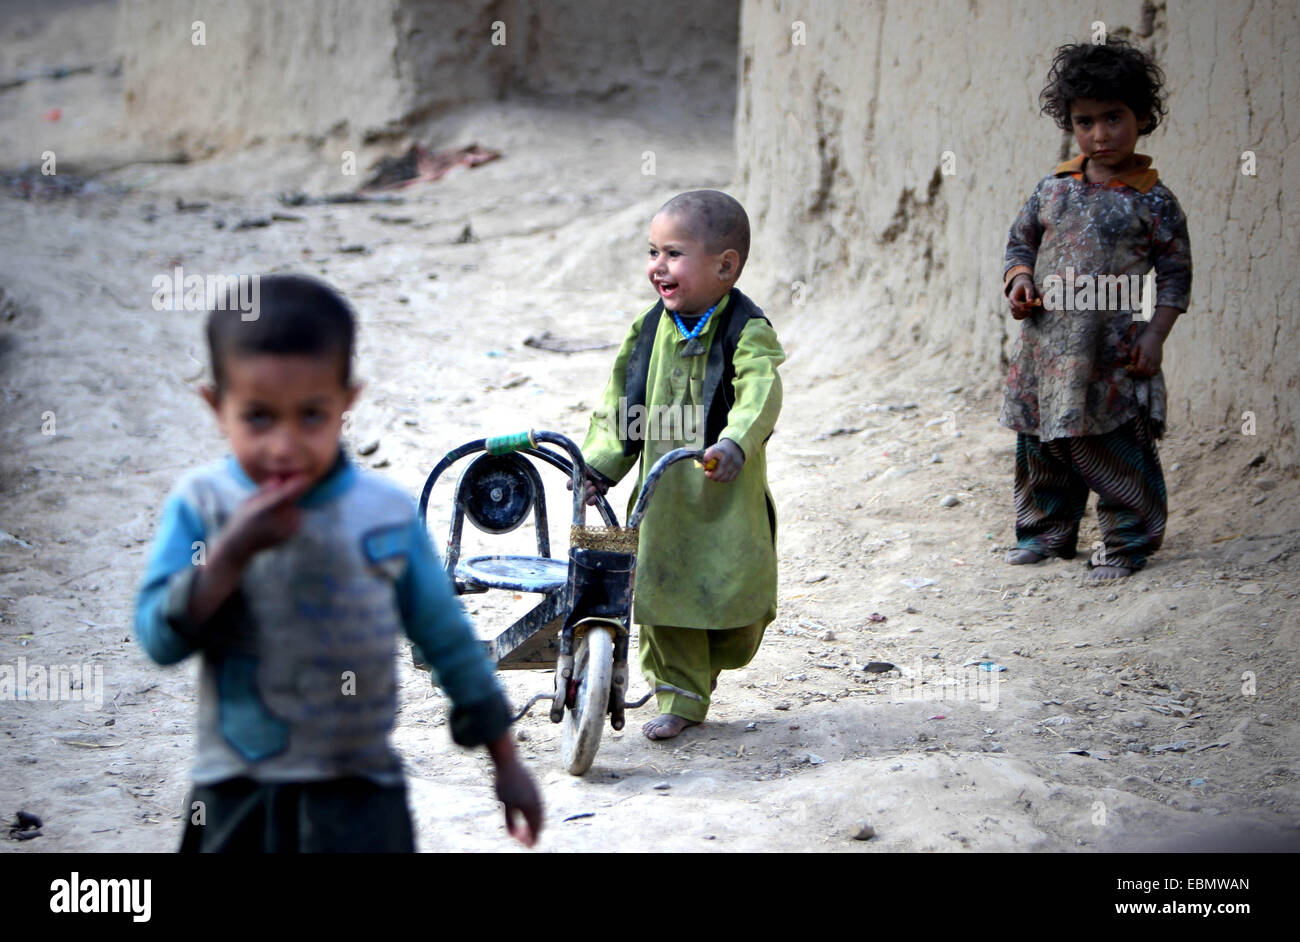 Kabul, Afghanistan. 2nd Dec, 2014. An Afghan displaced boy pushes his bicycle outside his home in Kabul, Afghanistan, Dec. 2, 2014. It is believed that nearly 4 million school-aged Afghan children are kept from schooling, according to officials. © Ahmad Massoud/Xinhua/Alamy Live News Stock Photo